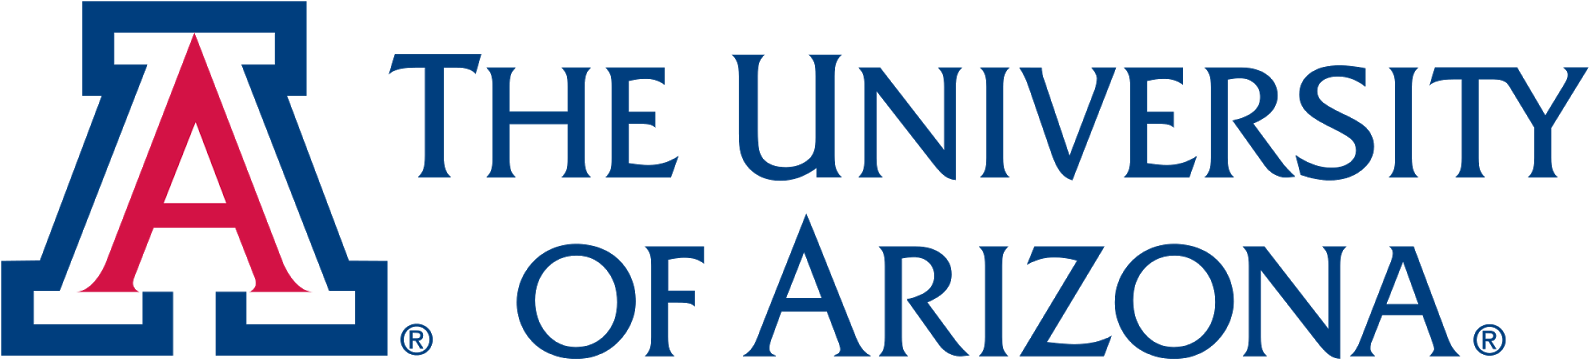 The University Of Arizona Is An Available Appraisement - University Of Arizona Logo Png (1600x371)